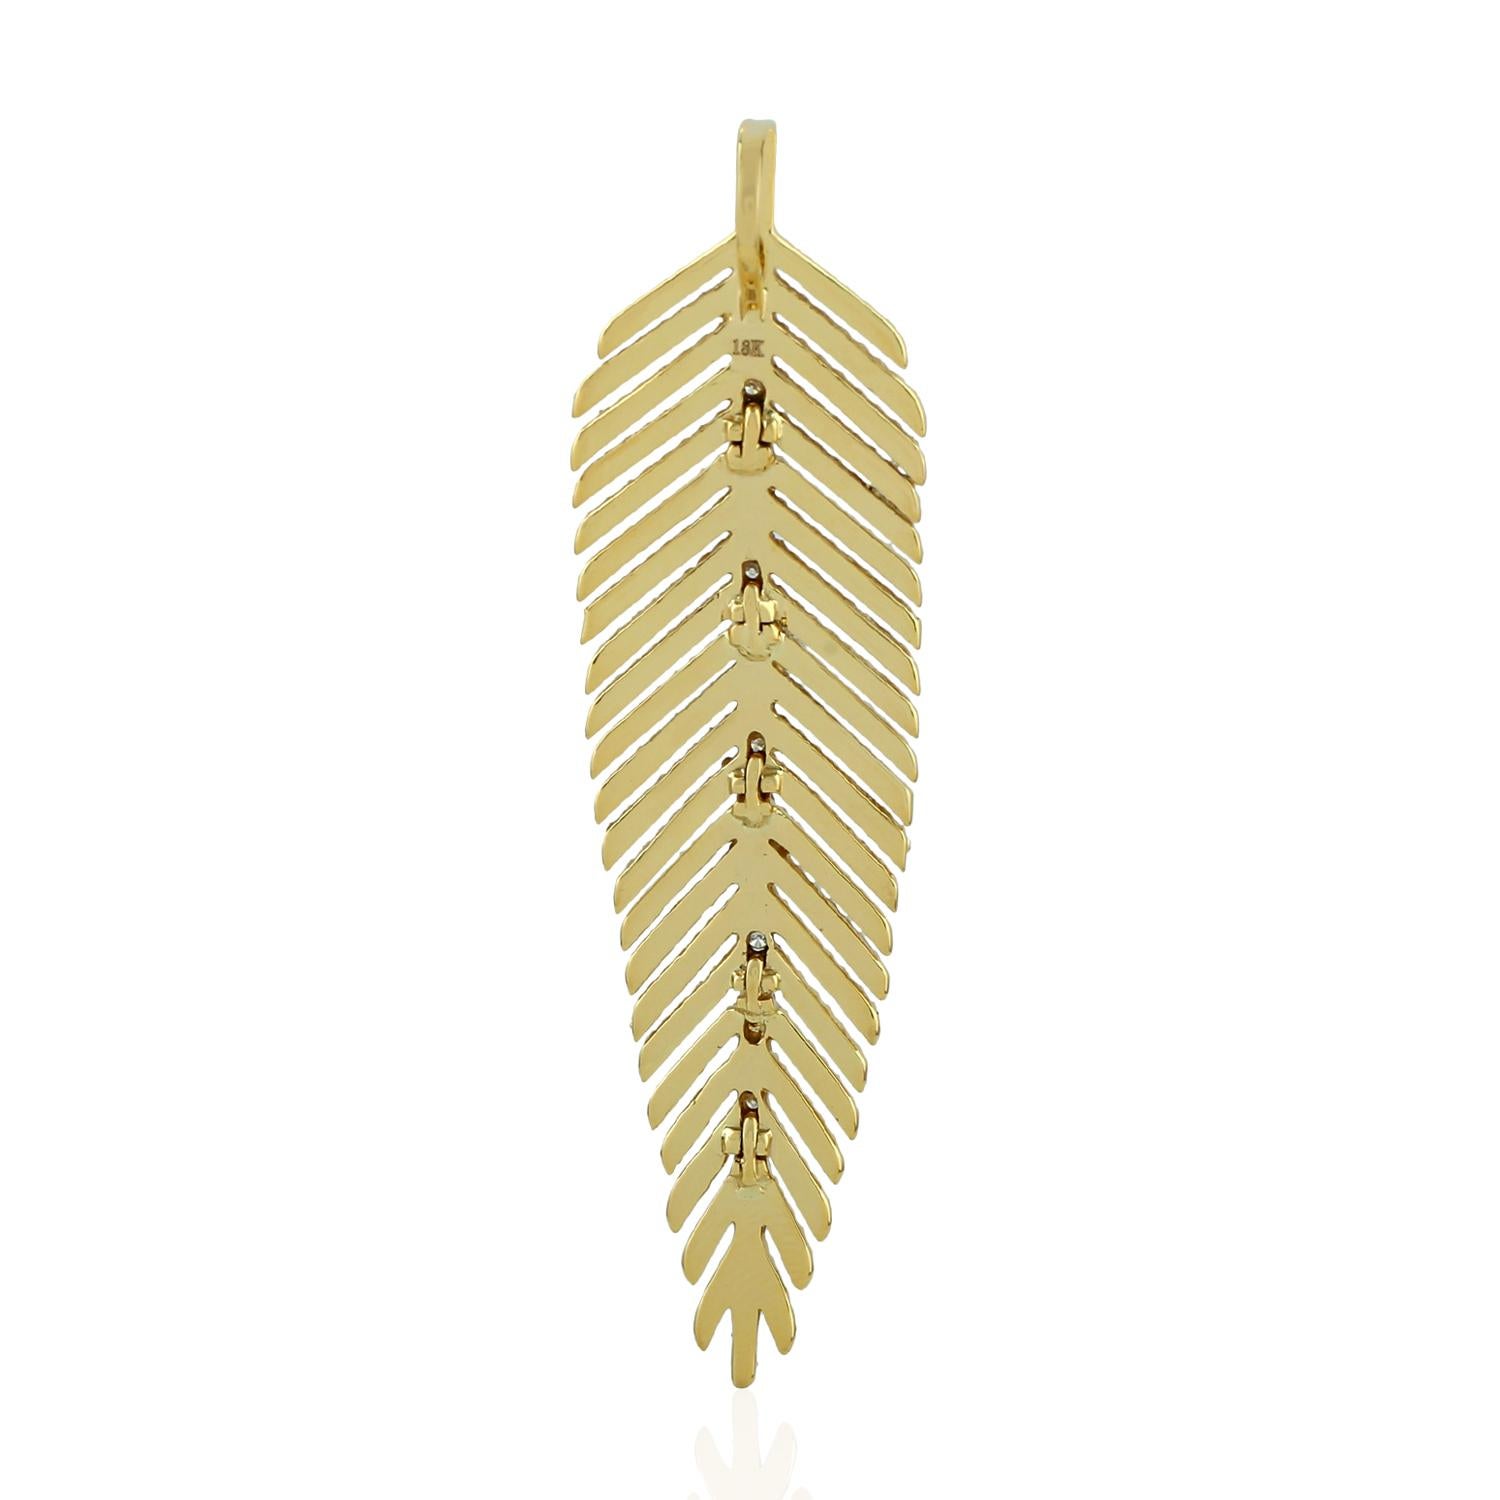 Cast in 18 Karat gold, this beautiful feather pendant is set in 1.39 carats of sparkling diamonds.  Available in yellow and white gold.

FOLLOW  MEGHNA JEWELS storefront to view the latest collection & exclusive pieces.  Meghna Jewels is proudly